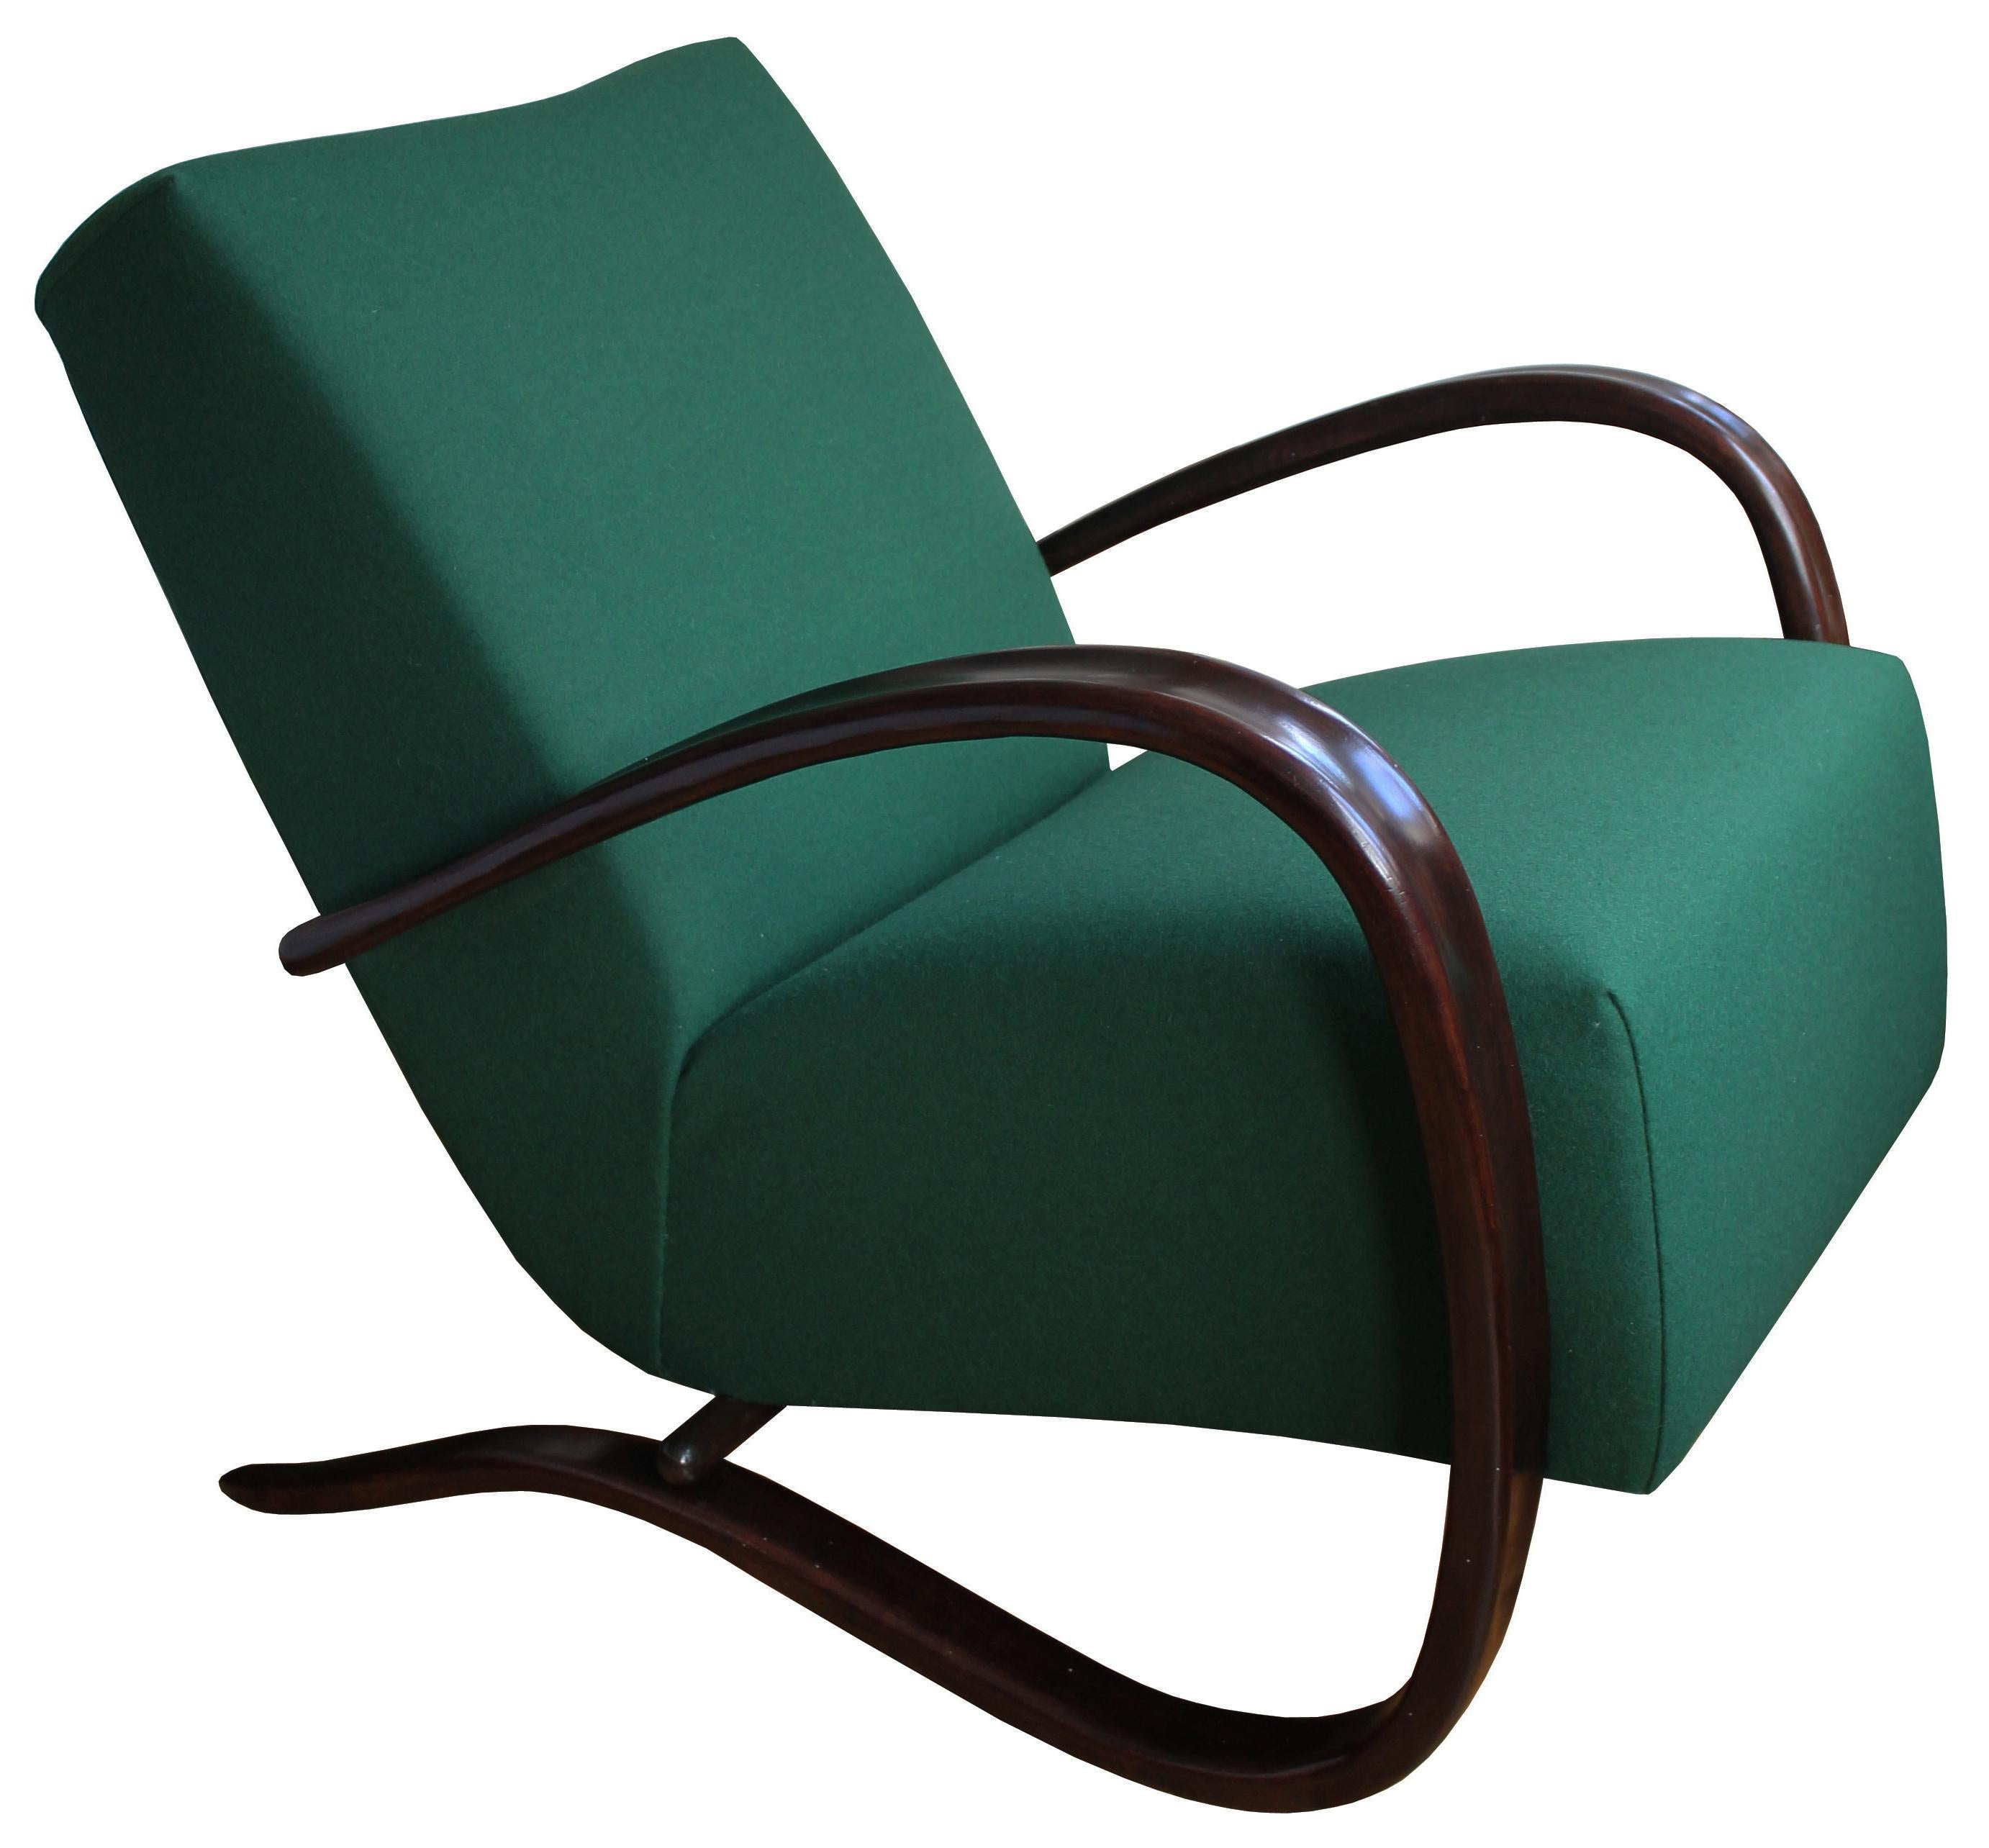 Other 1930s Czech H269 Art Deco Armchair by Jindrich Halabala for UP Brno